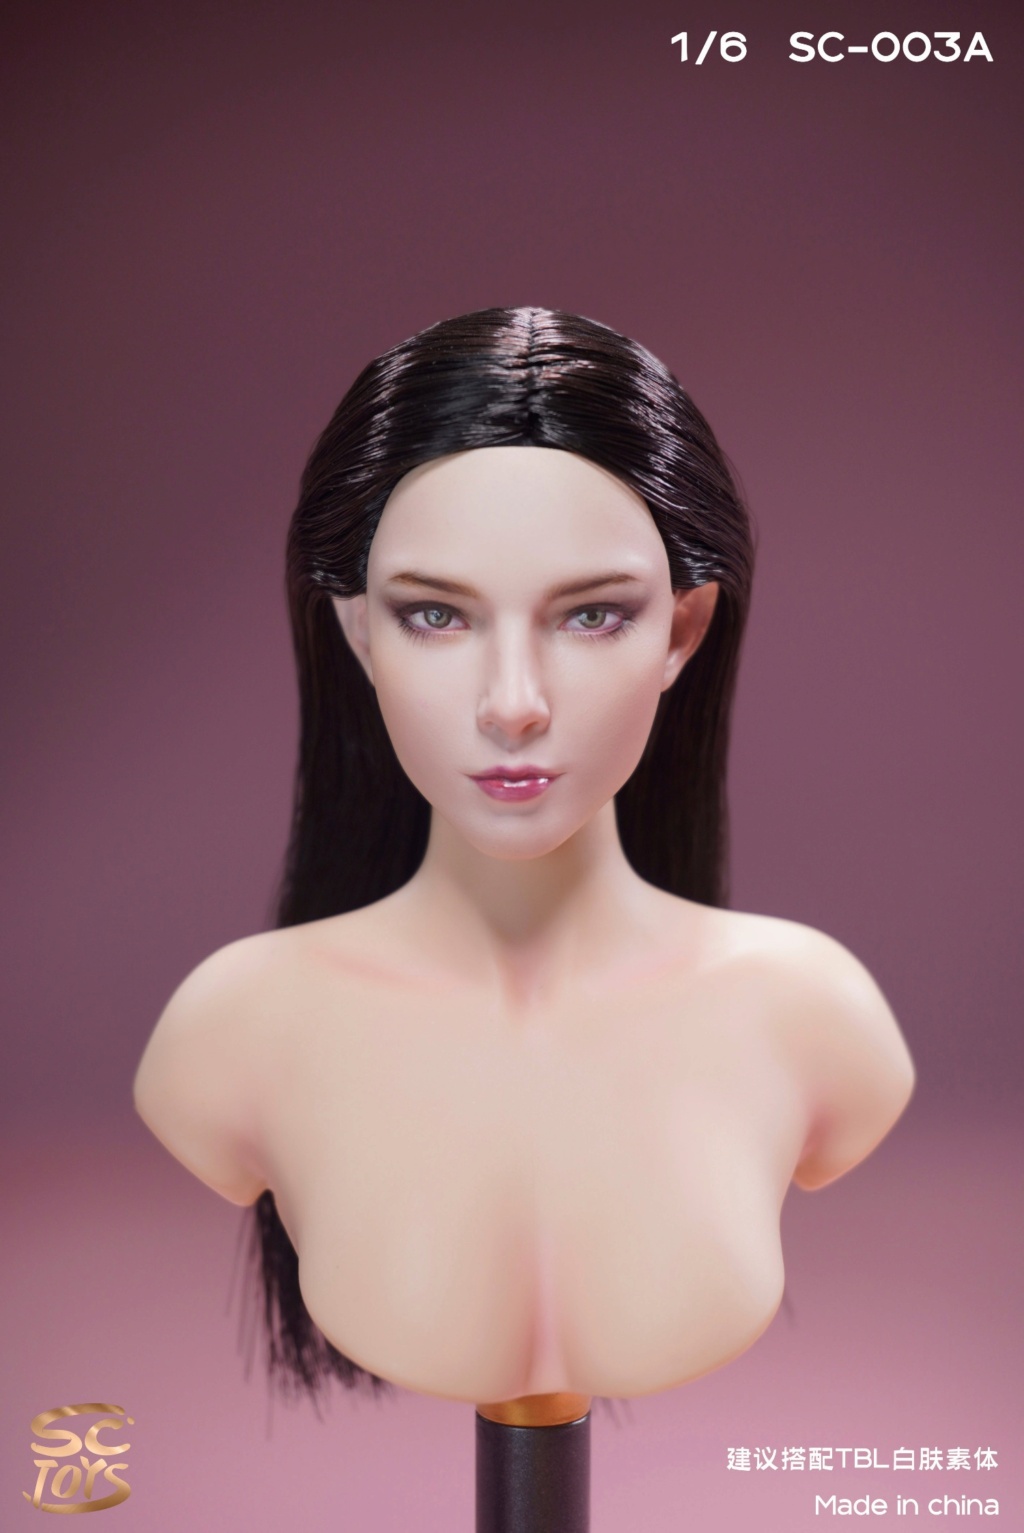 LaLi - NEW PRODUCT: SCToys: 1/6 European and American head sculpture - LaLi - three hairstyles #SC003A/B/C 20570210